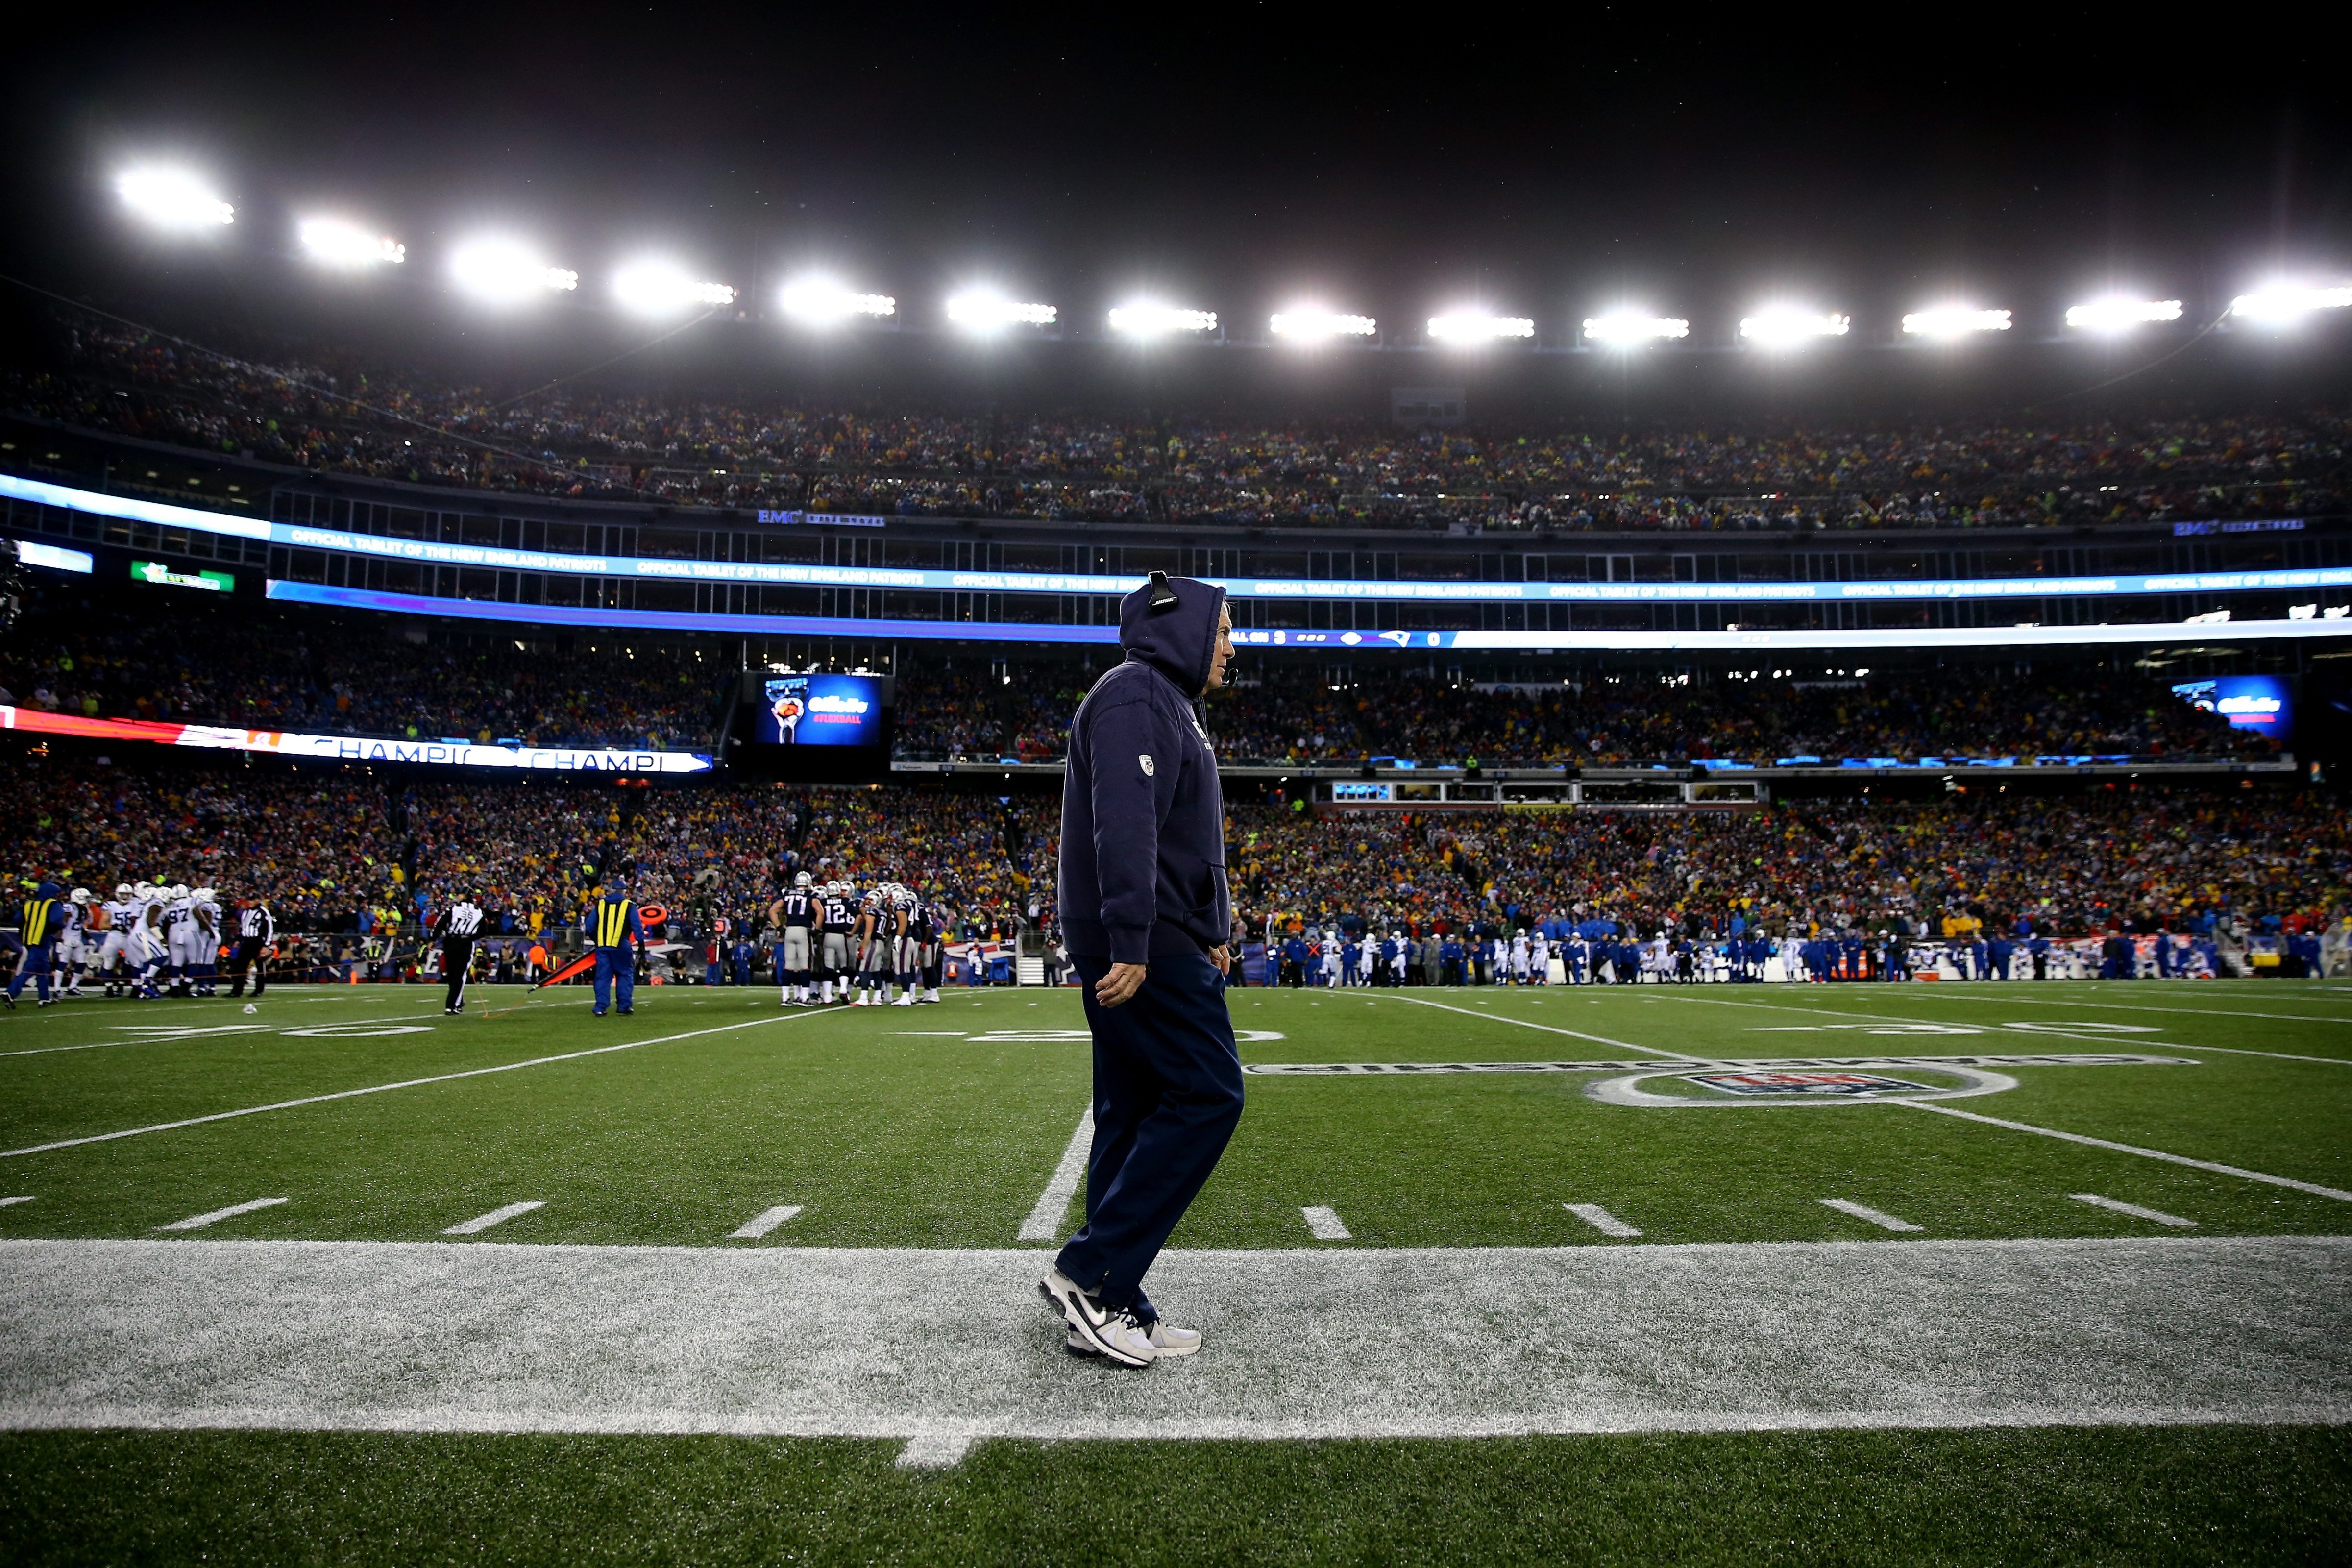 Head coach Bill Belichick of the New England Patriots looks on from the sideline in the first half against the Indianapolis Colts during the 2015 AFC Championship Game at Gillette Stadium on Jna. 18, 2015 in Foxboro, Mass. (Elsa—Getty Images)